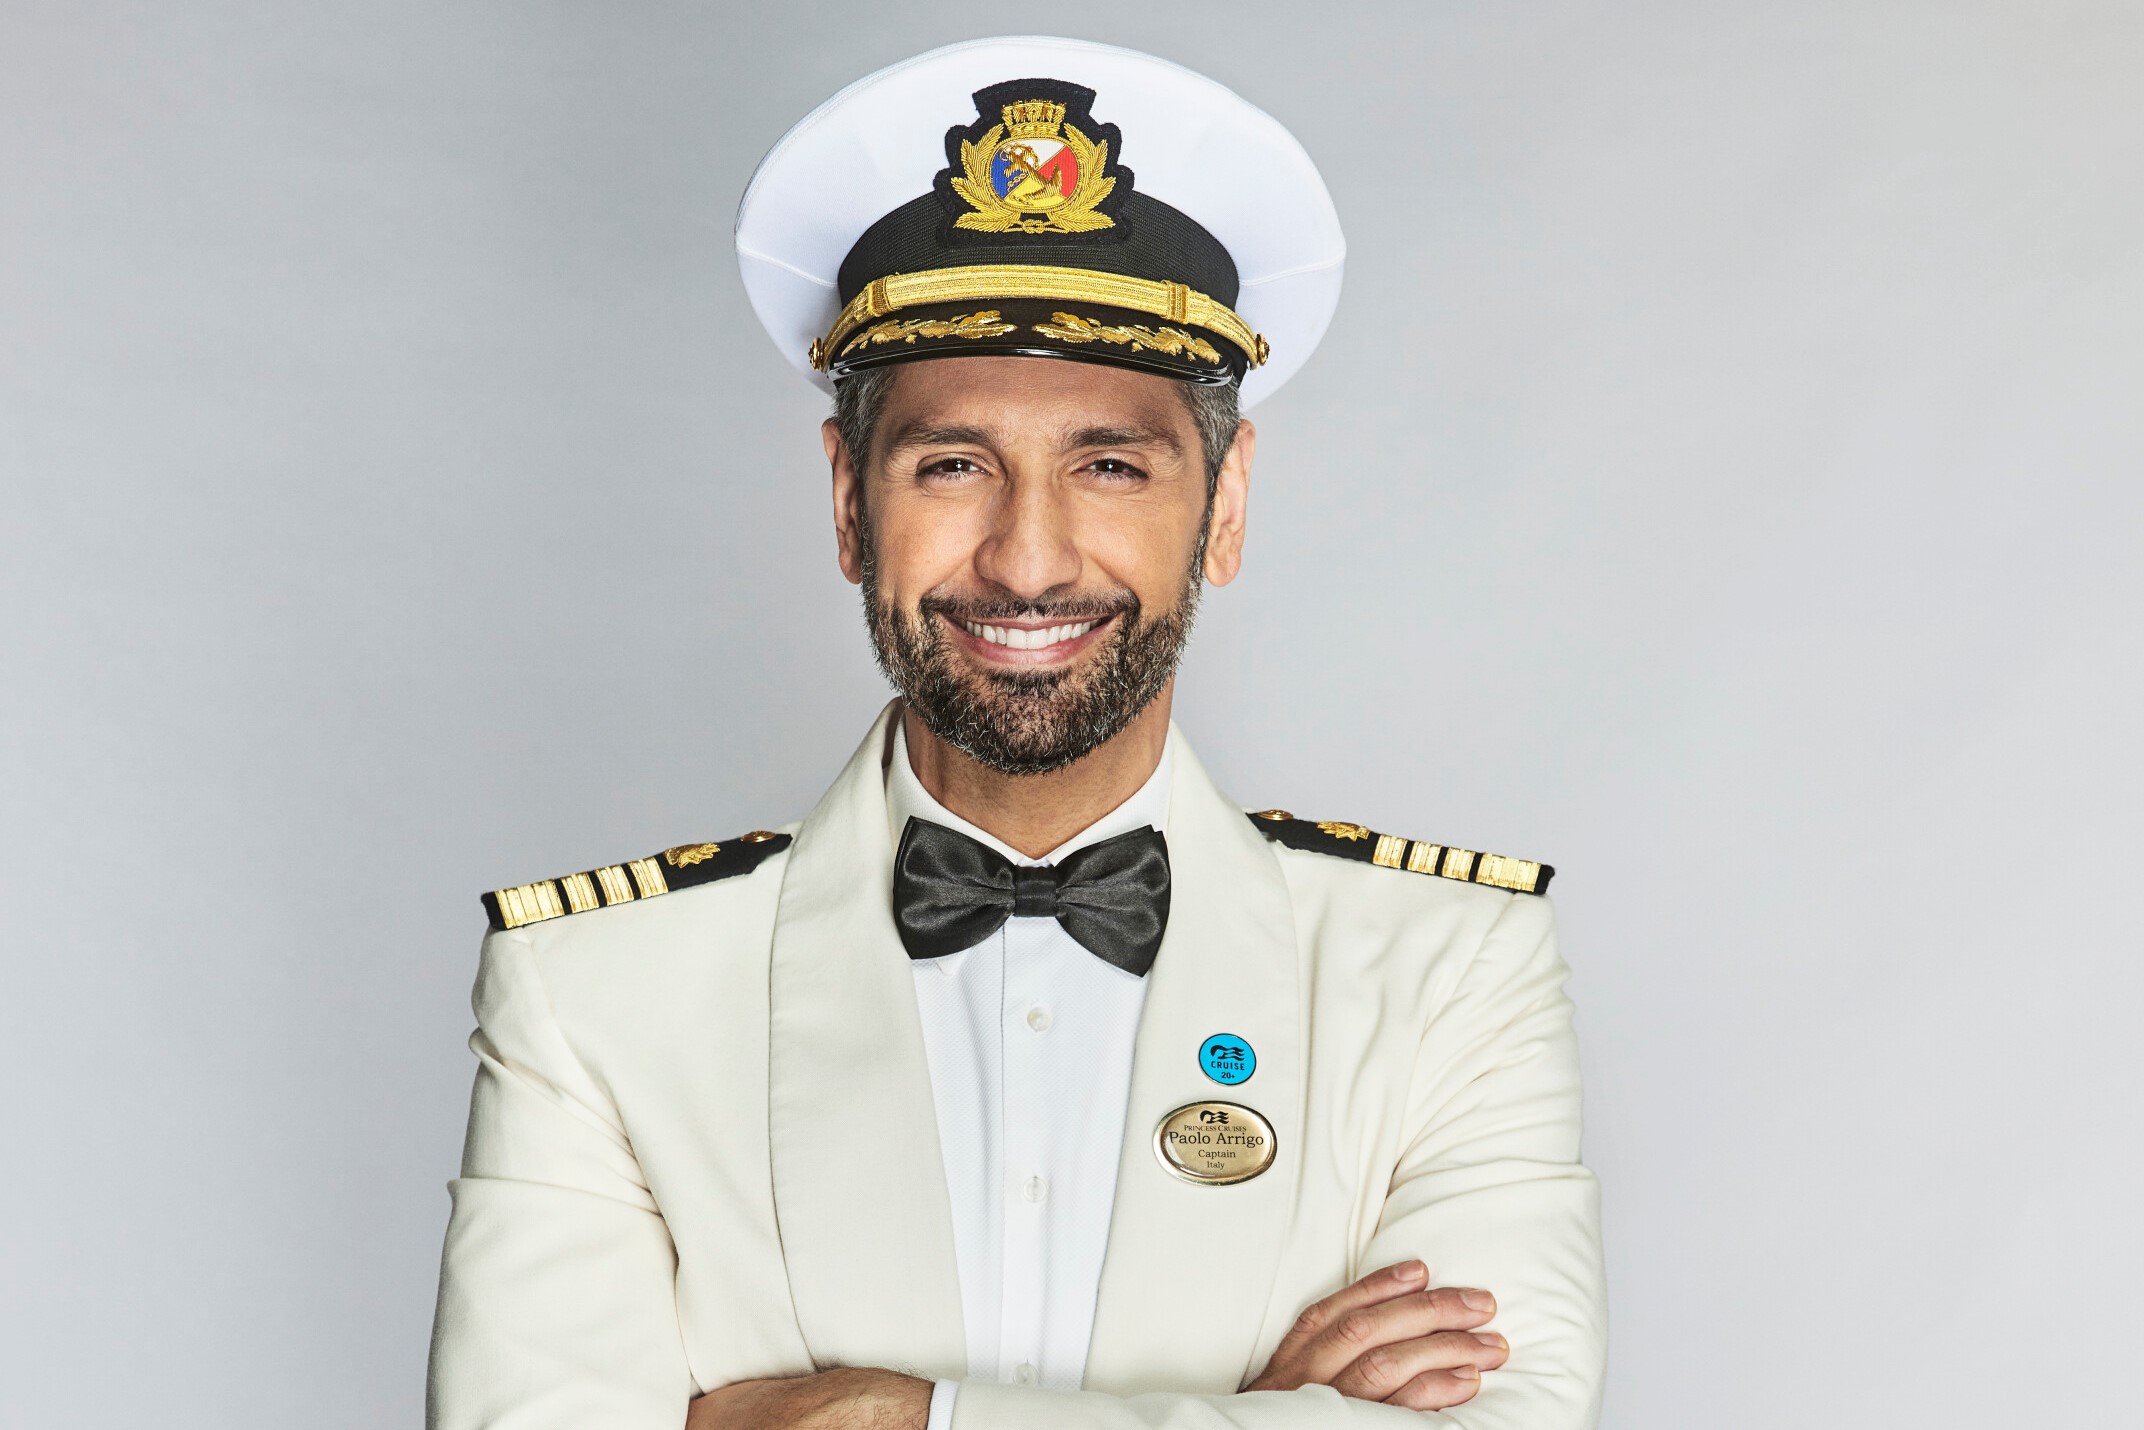 Captain Paolo Arrigo, who stars in 'The Real Love Boat' on CBS, wears his white, black, and gold captain uniform, including his captain hat.